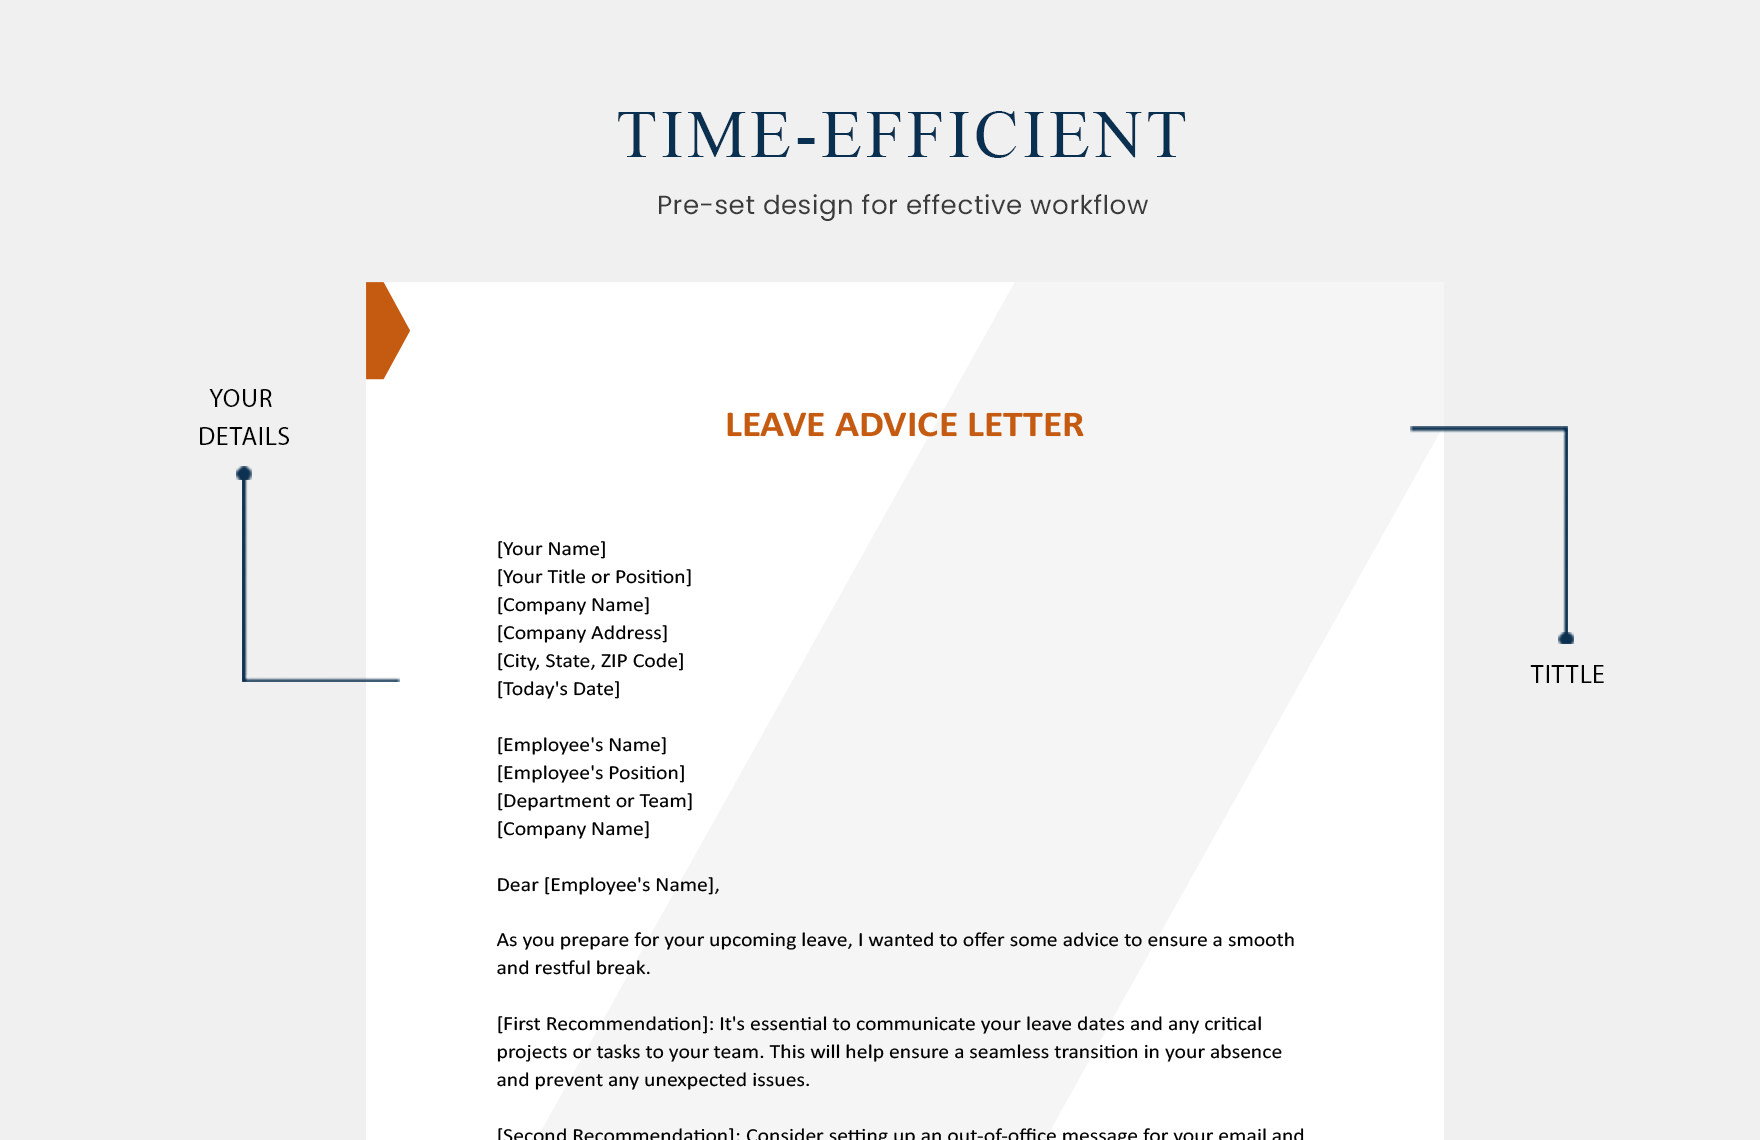 Leave Advice Letter